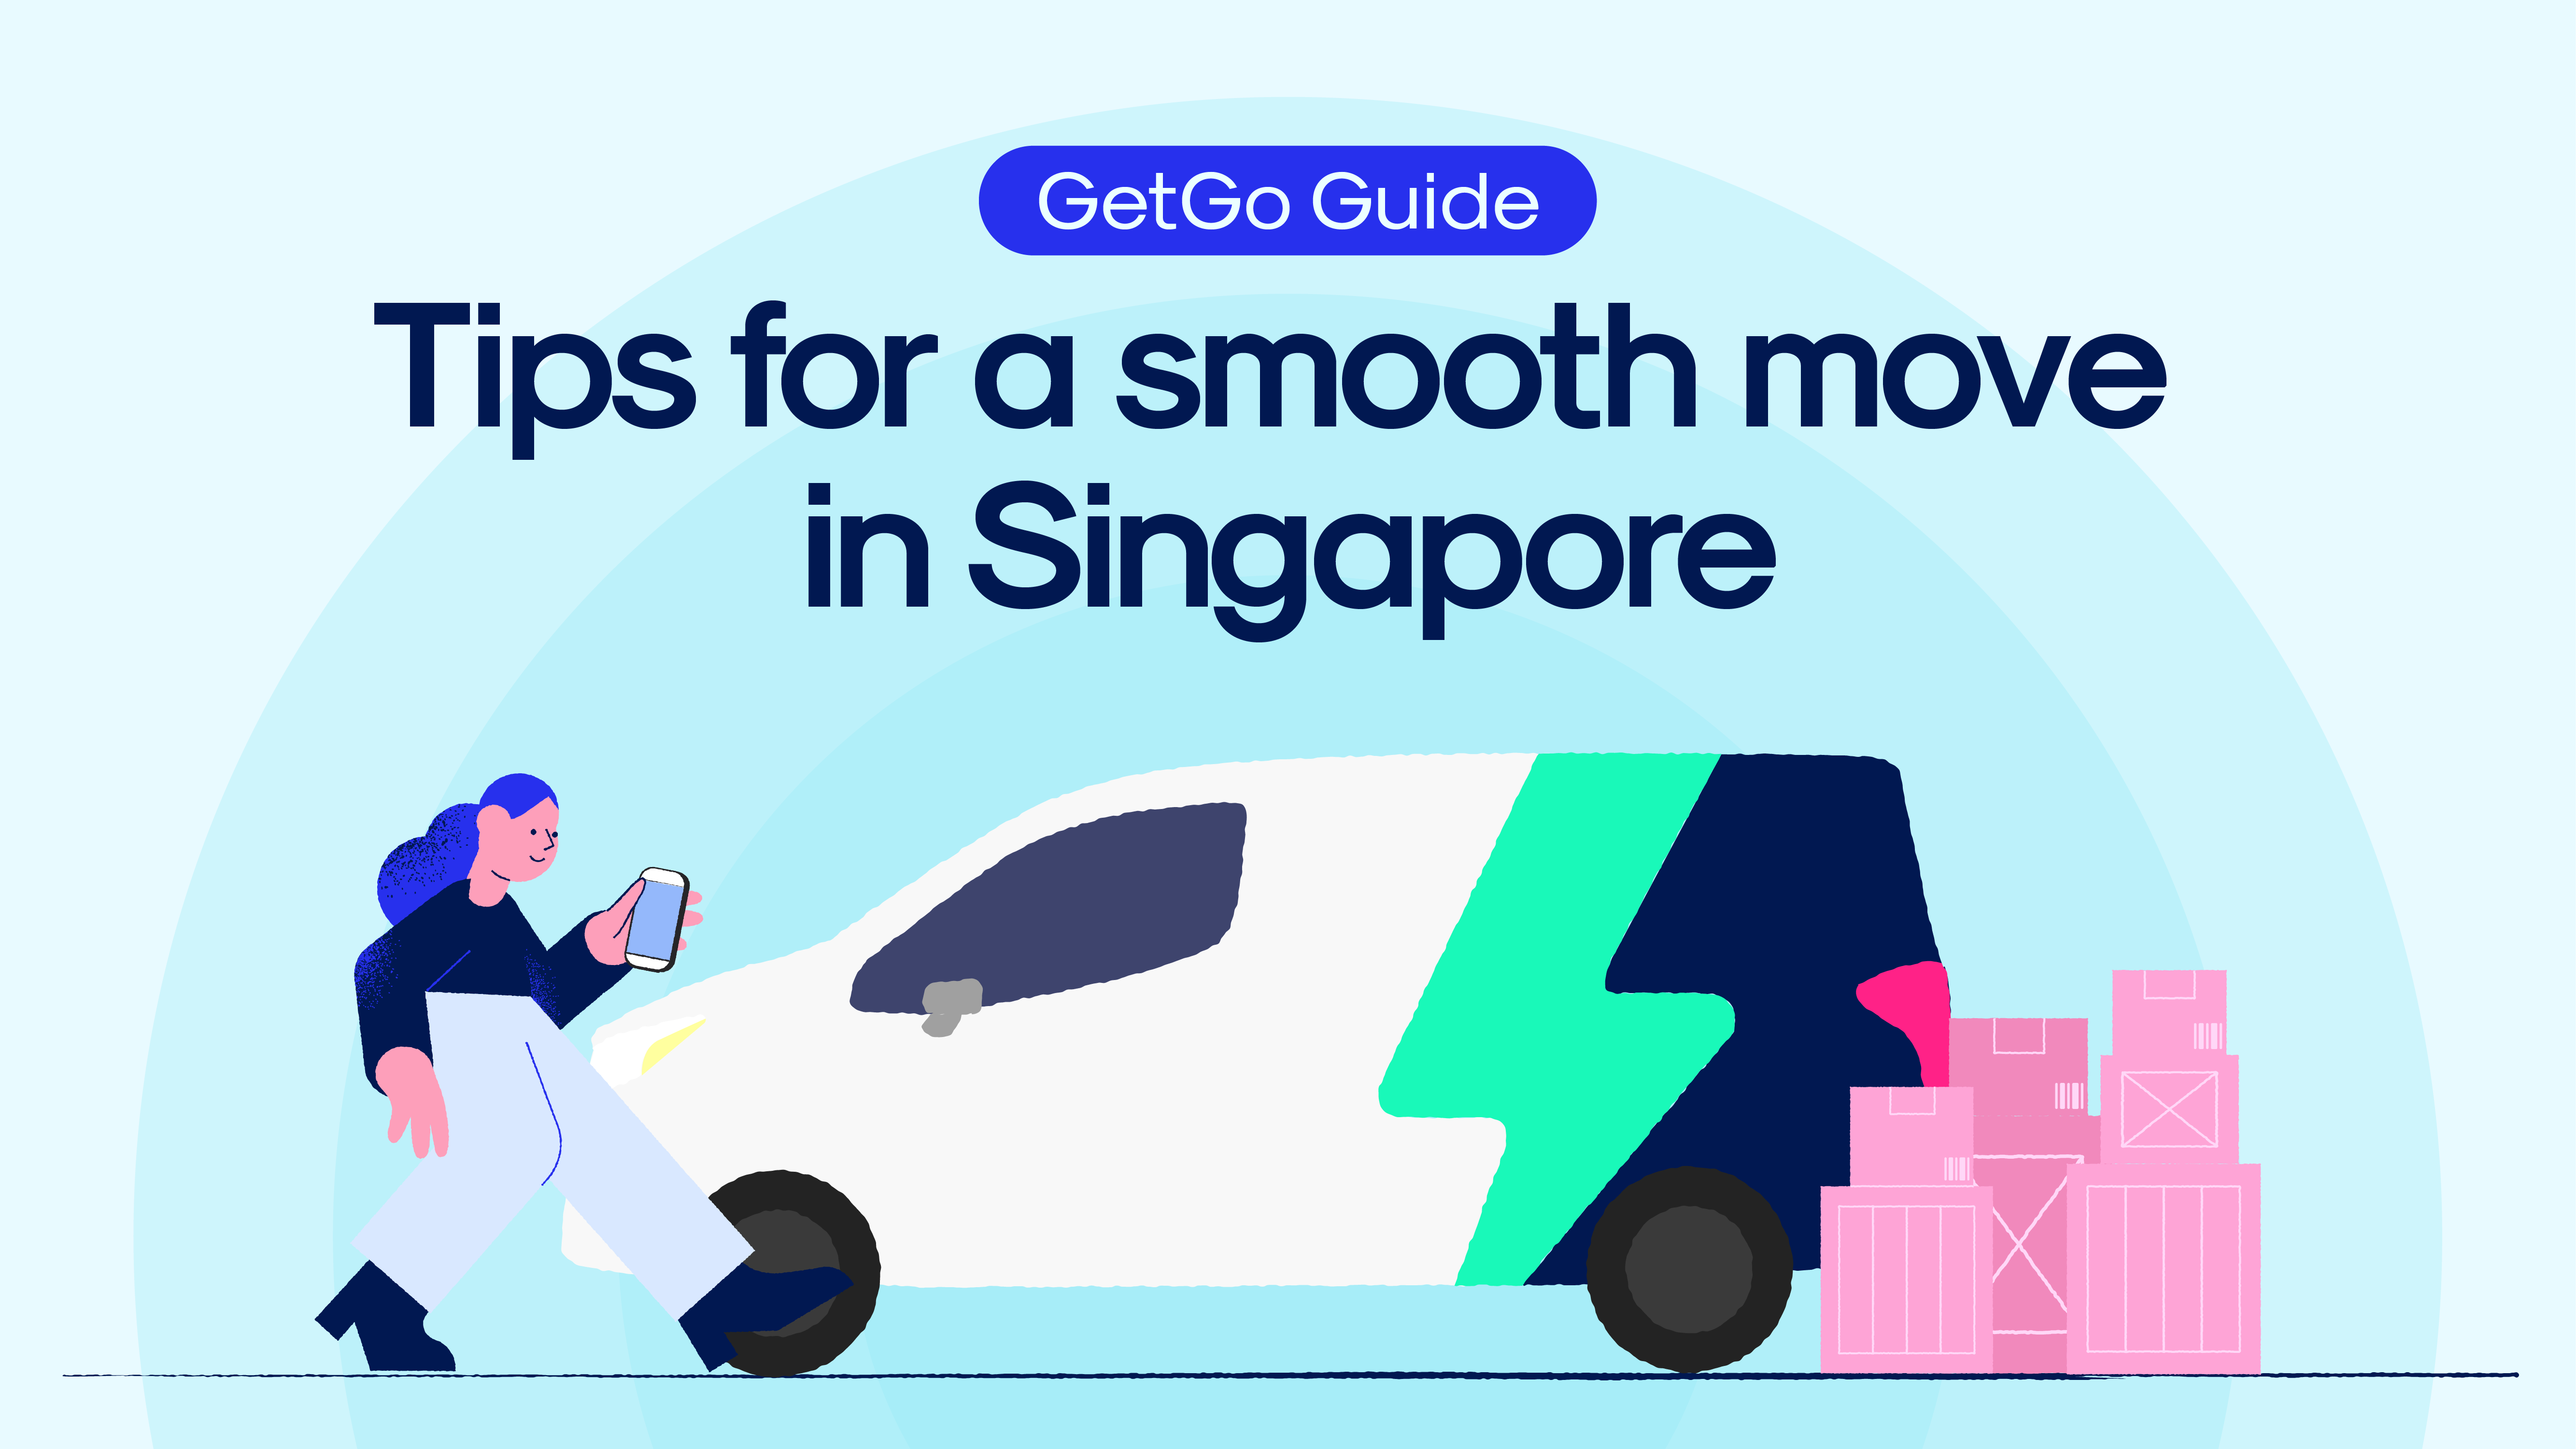 GetGo guide for a smooth move cover image